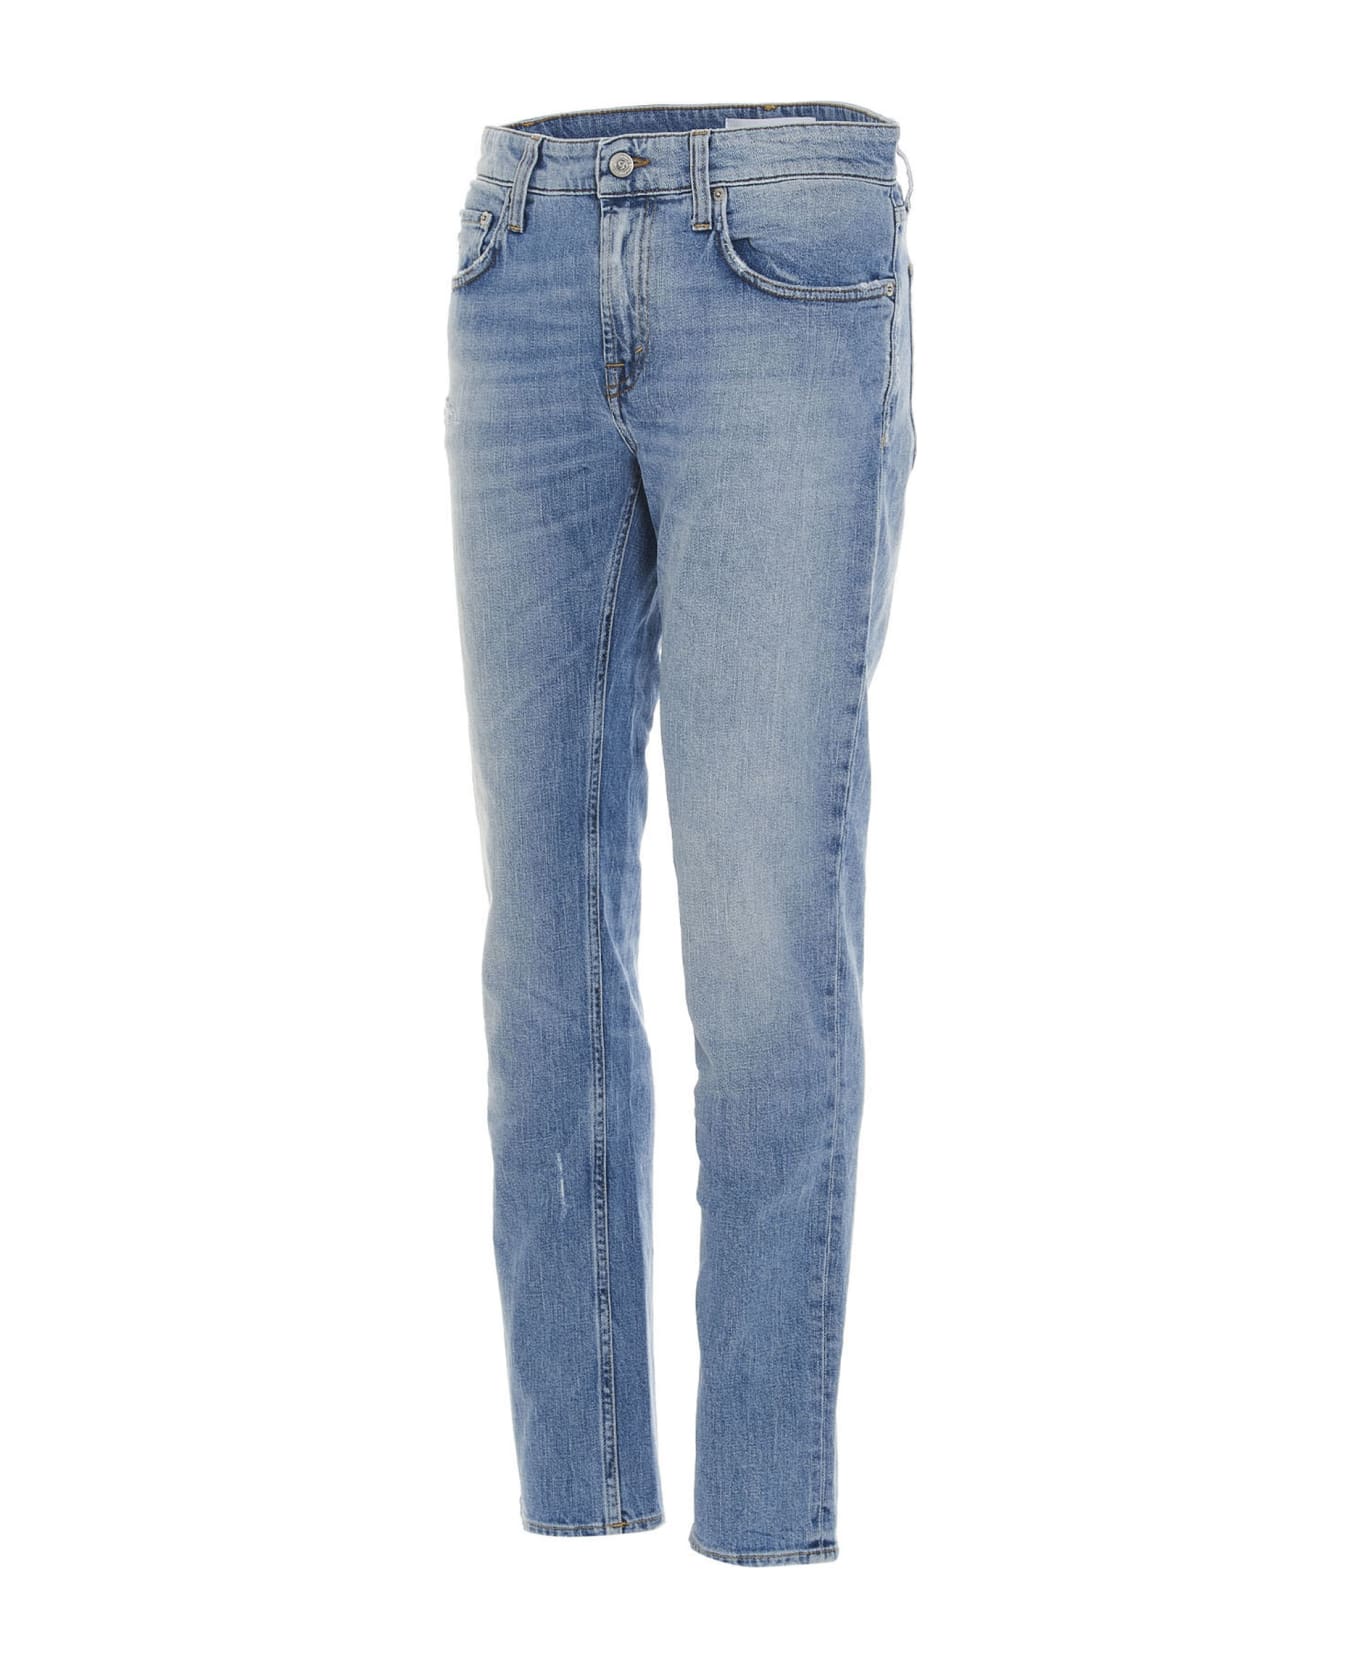 Department Five 'skeith Jeans - Light Blue